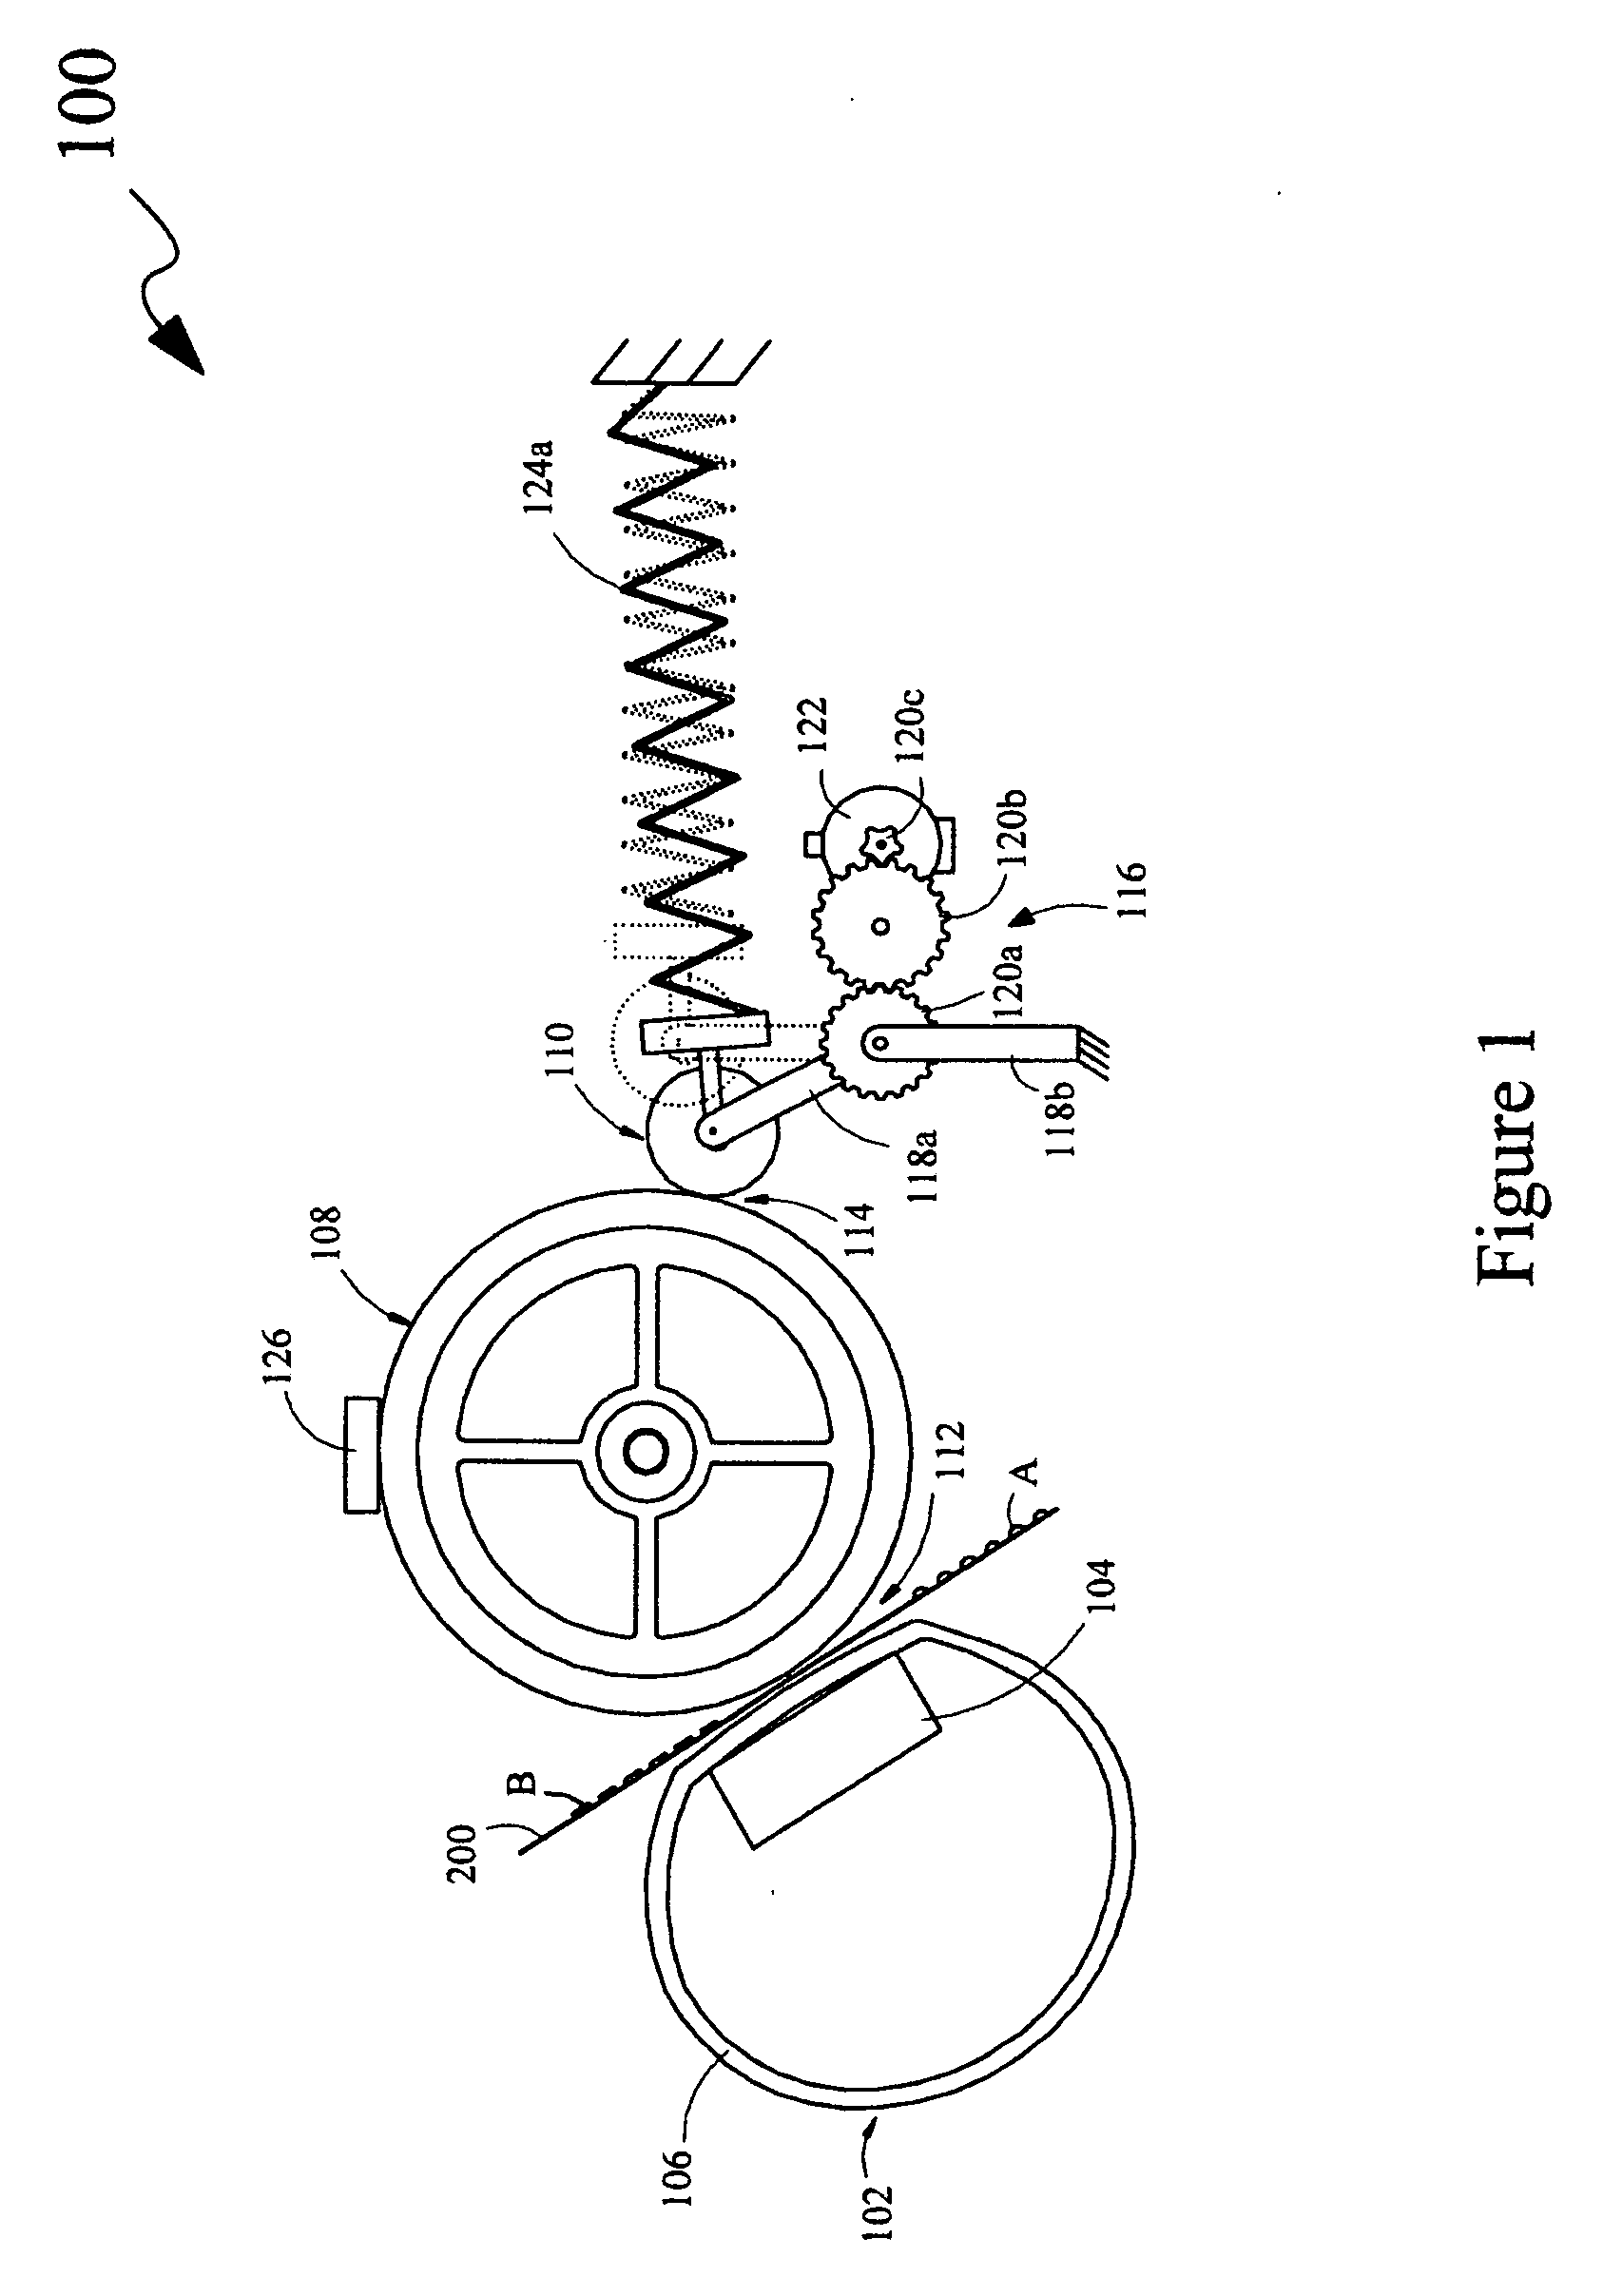 Control of overheating in an image fixing assembly